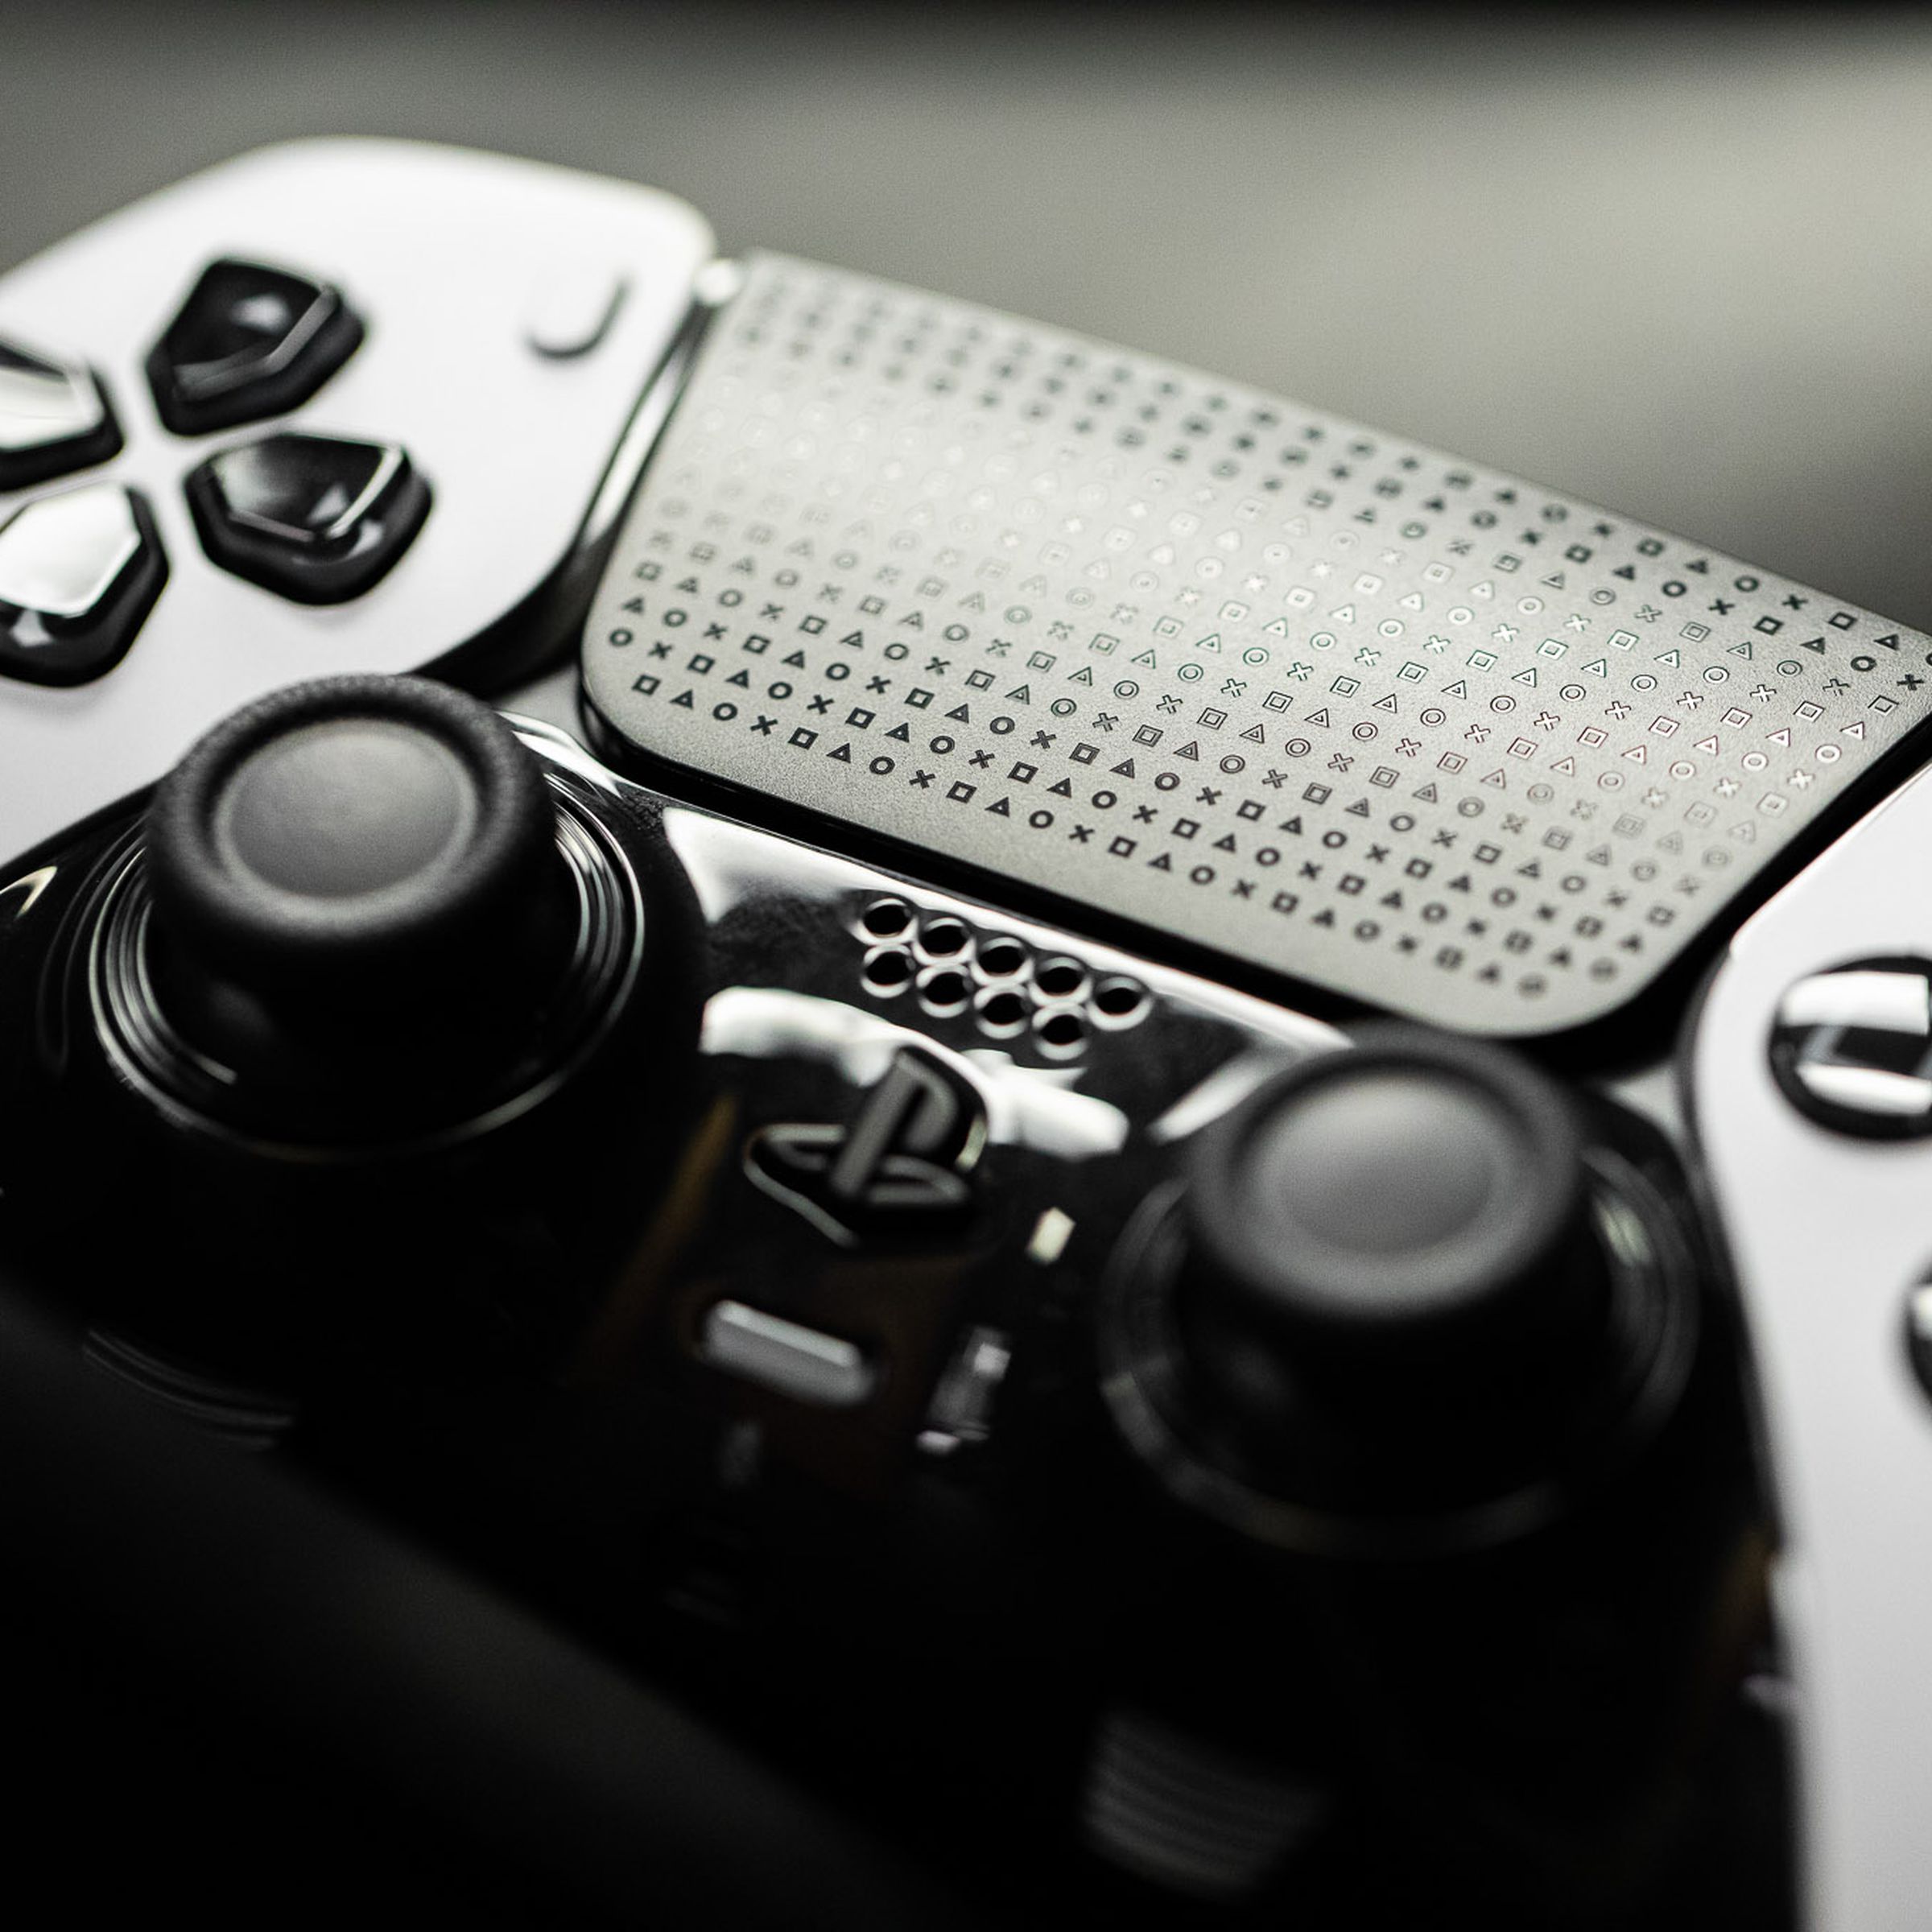 Close-up with the new premium PS5 controller, framed around its black buttons and D-pad and sticks and touchpad with PlayStation logos engraved.